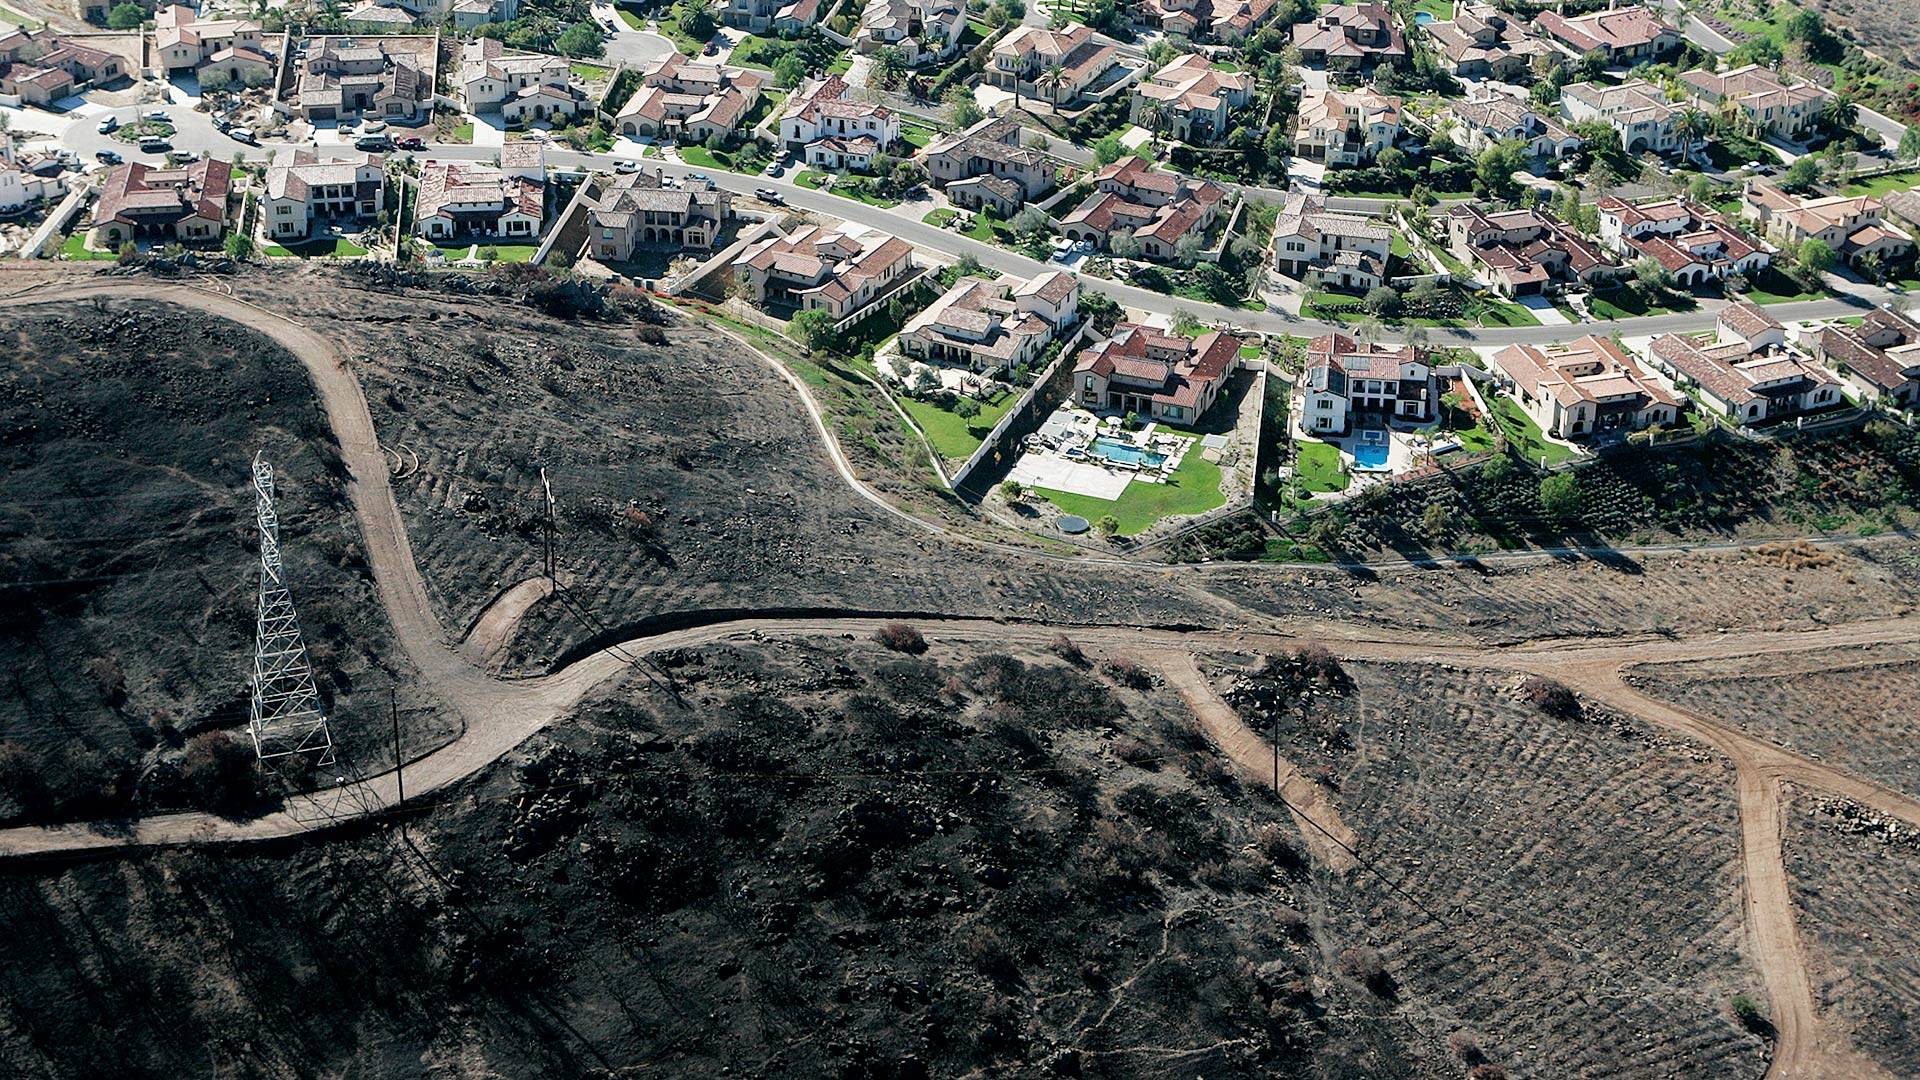 The 2007 Witch Fire burned right up to The Crosby neighborhood at Rancho Santa Fe, but not a single house was ignited. Don Barletti/Los Angeles Times via Getty Images